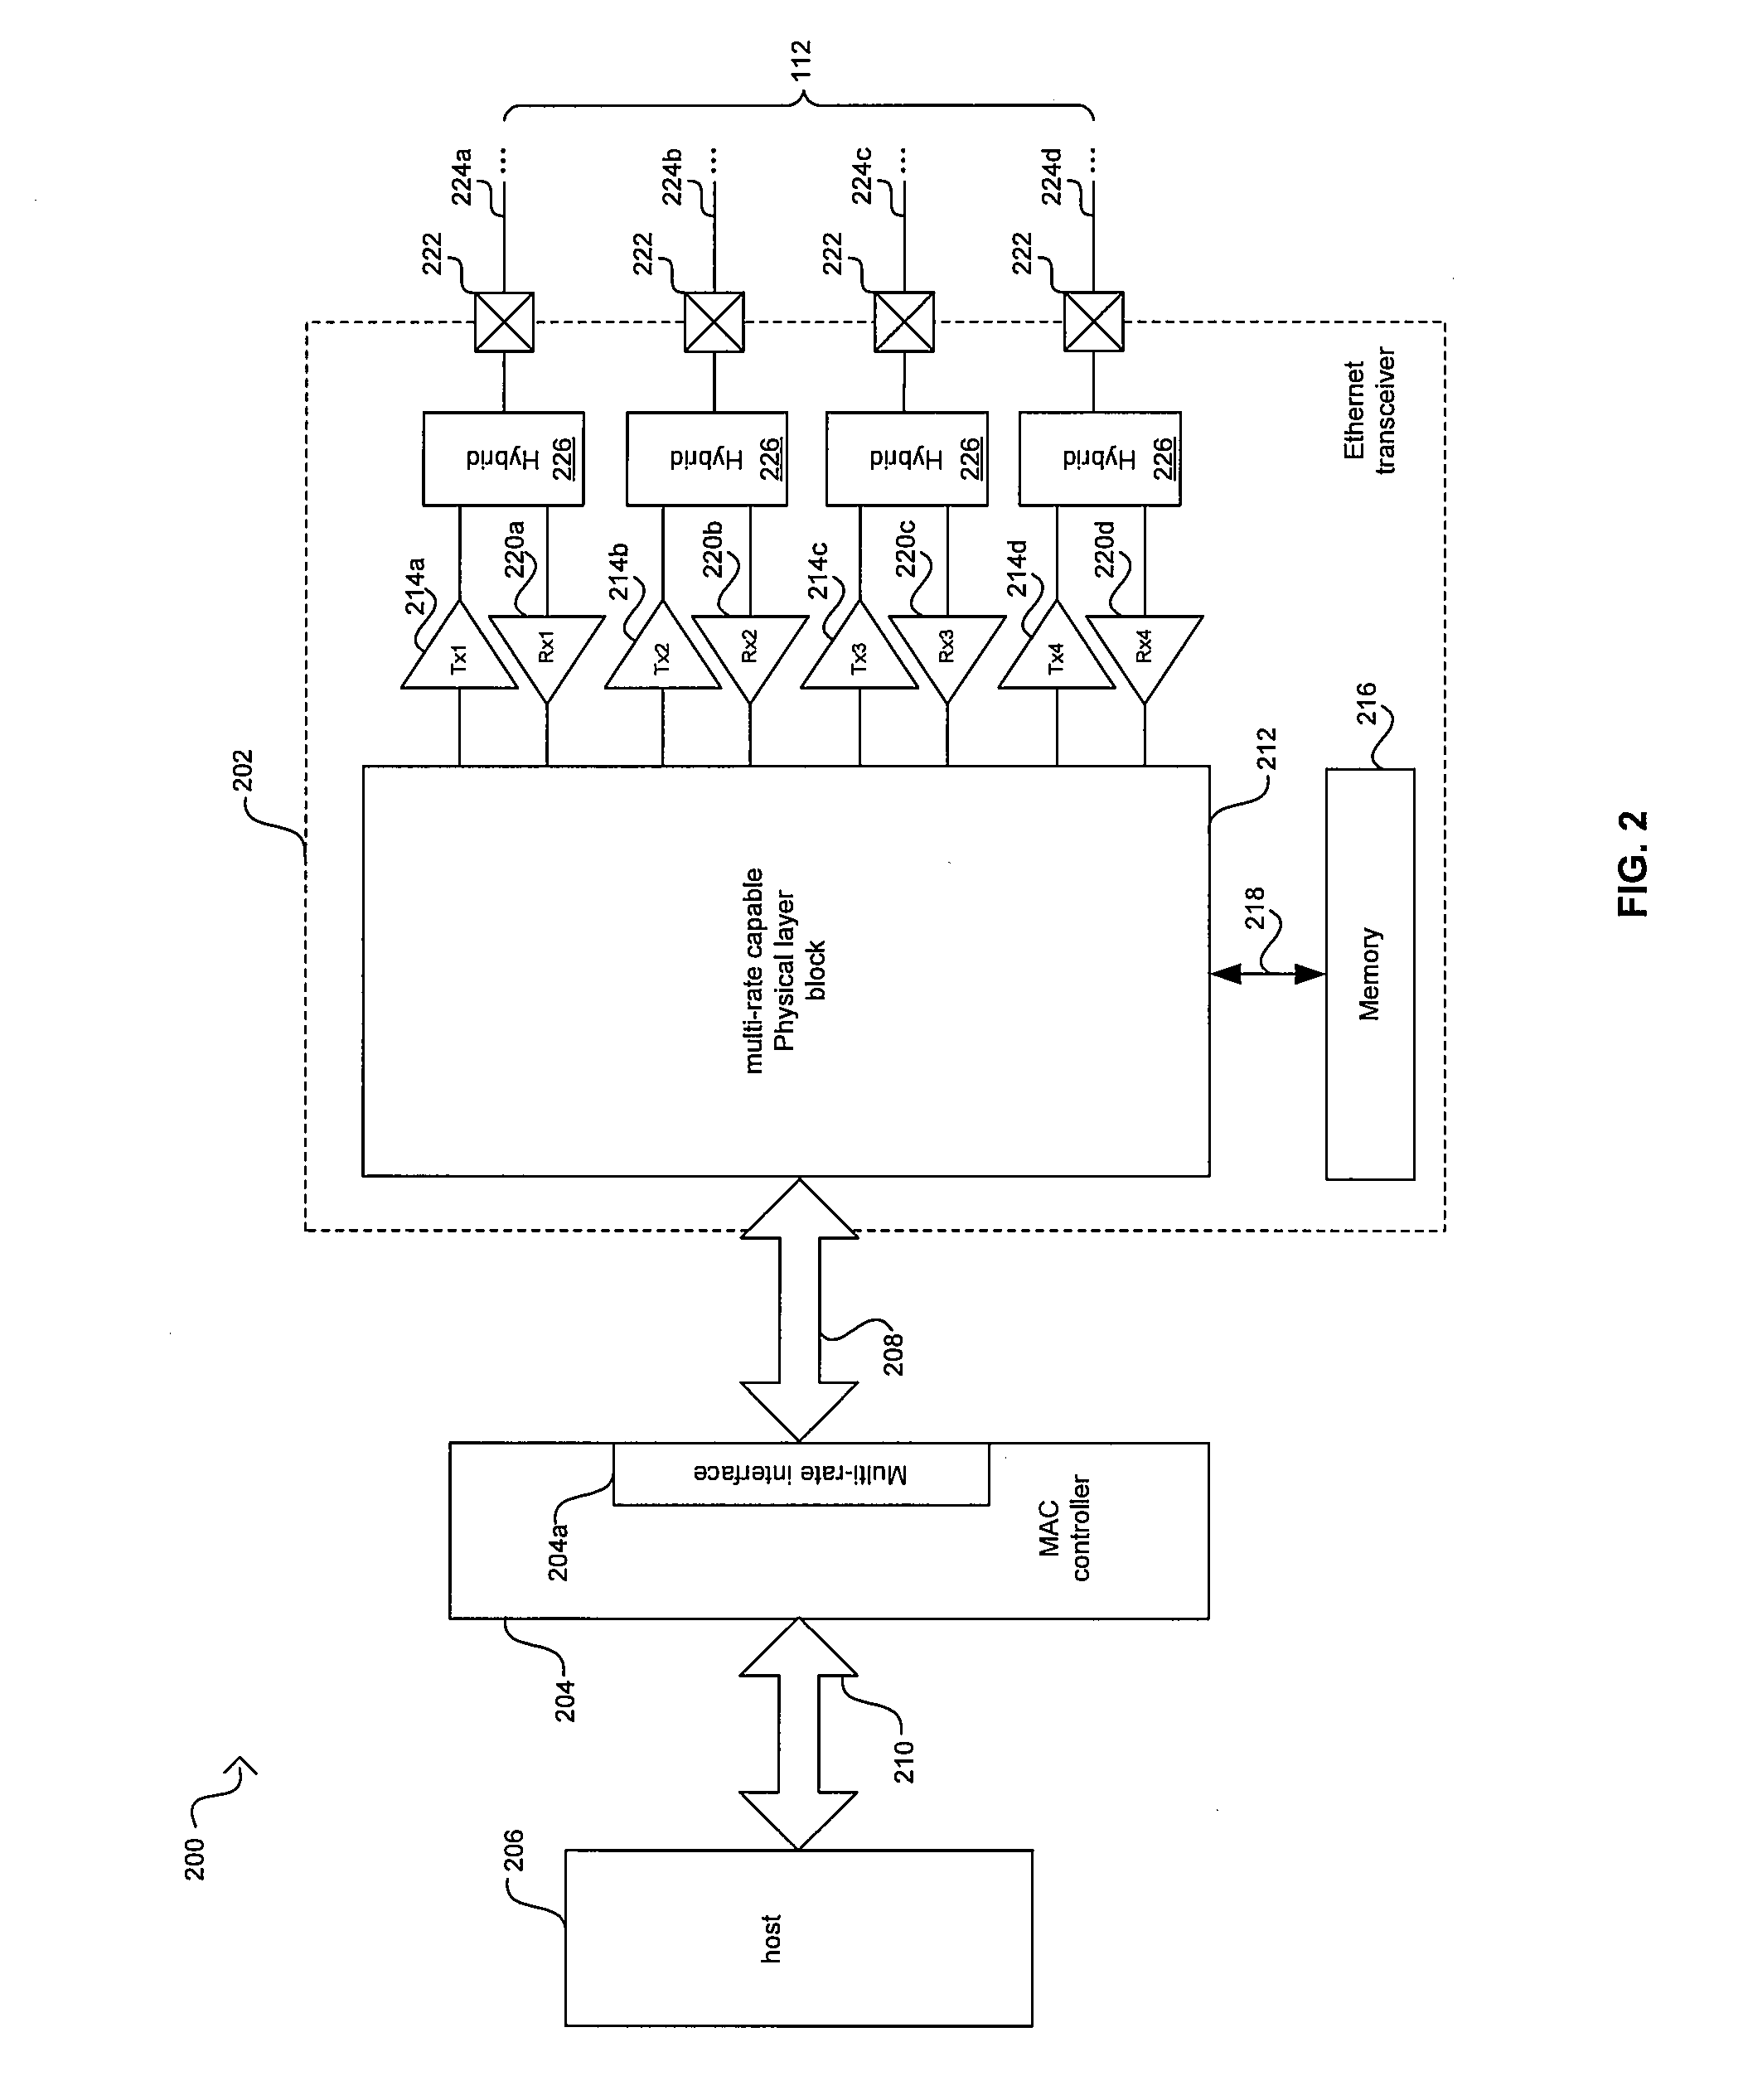 Method And System For A Distinct Physical Pattern On An Active Channel To Indicate A Data Rate Transition For Energy Efficient Ethernet